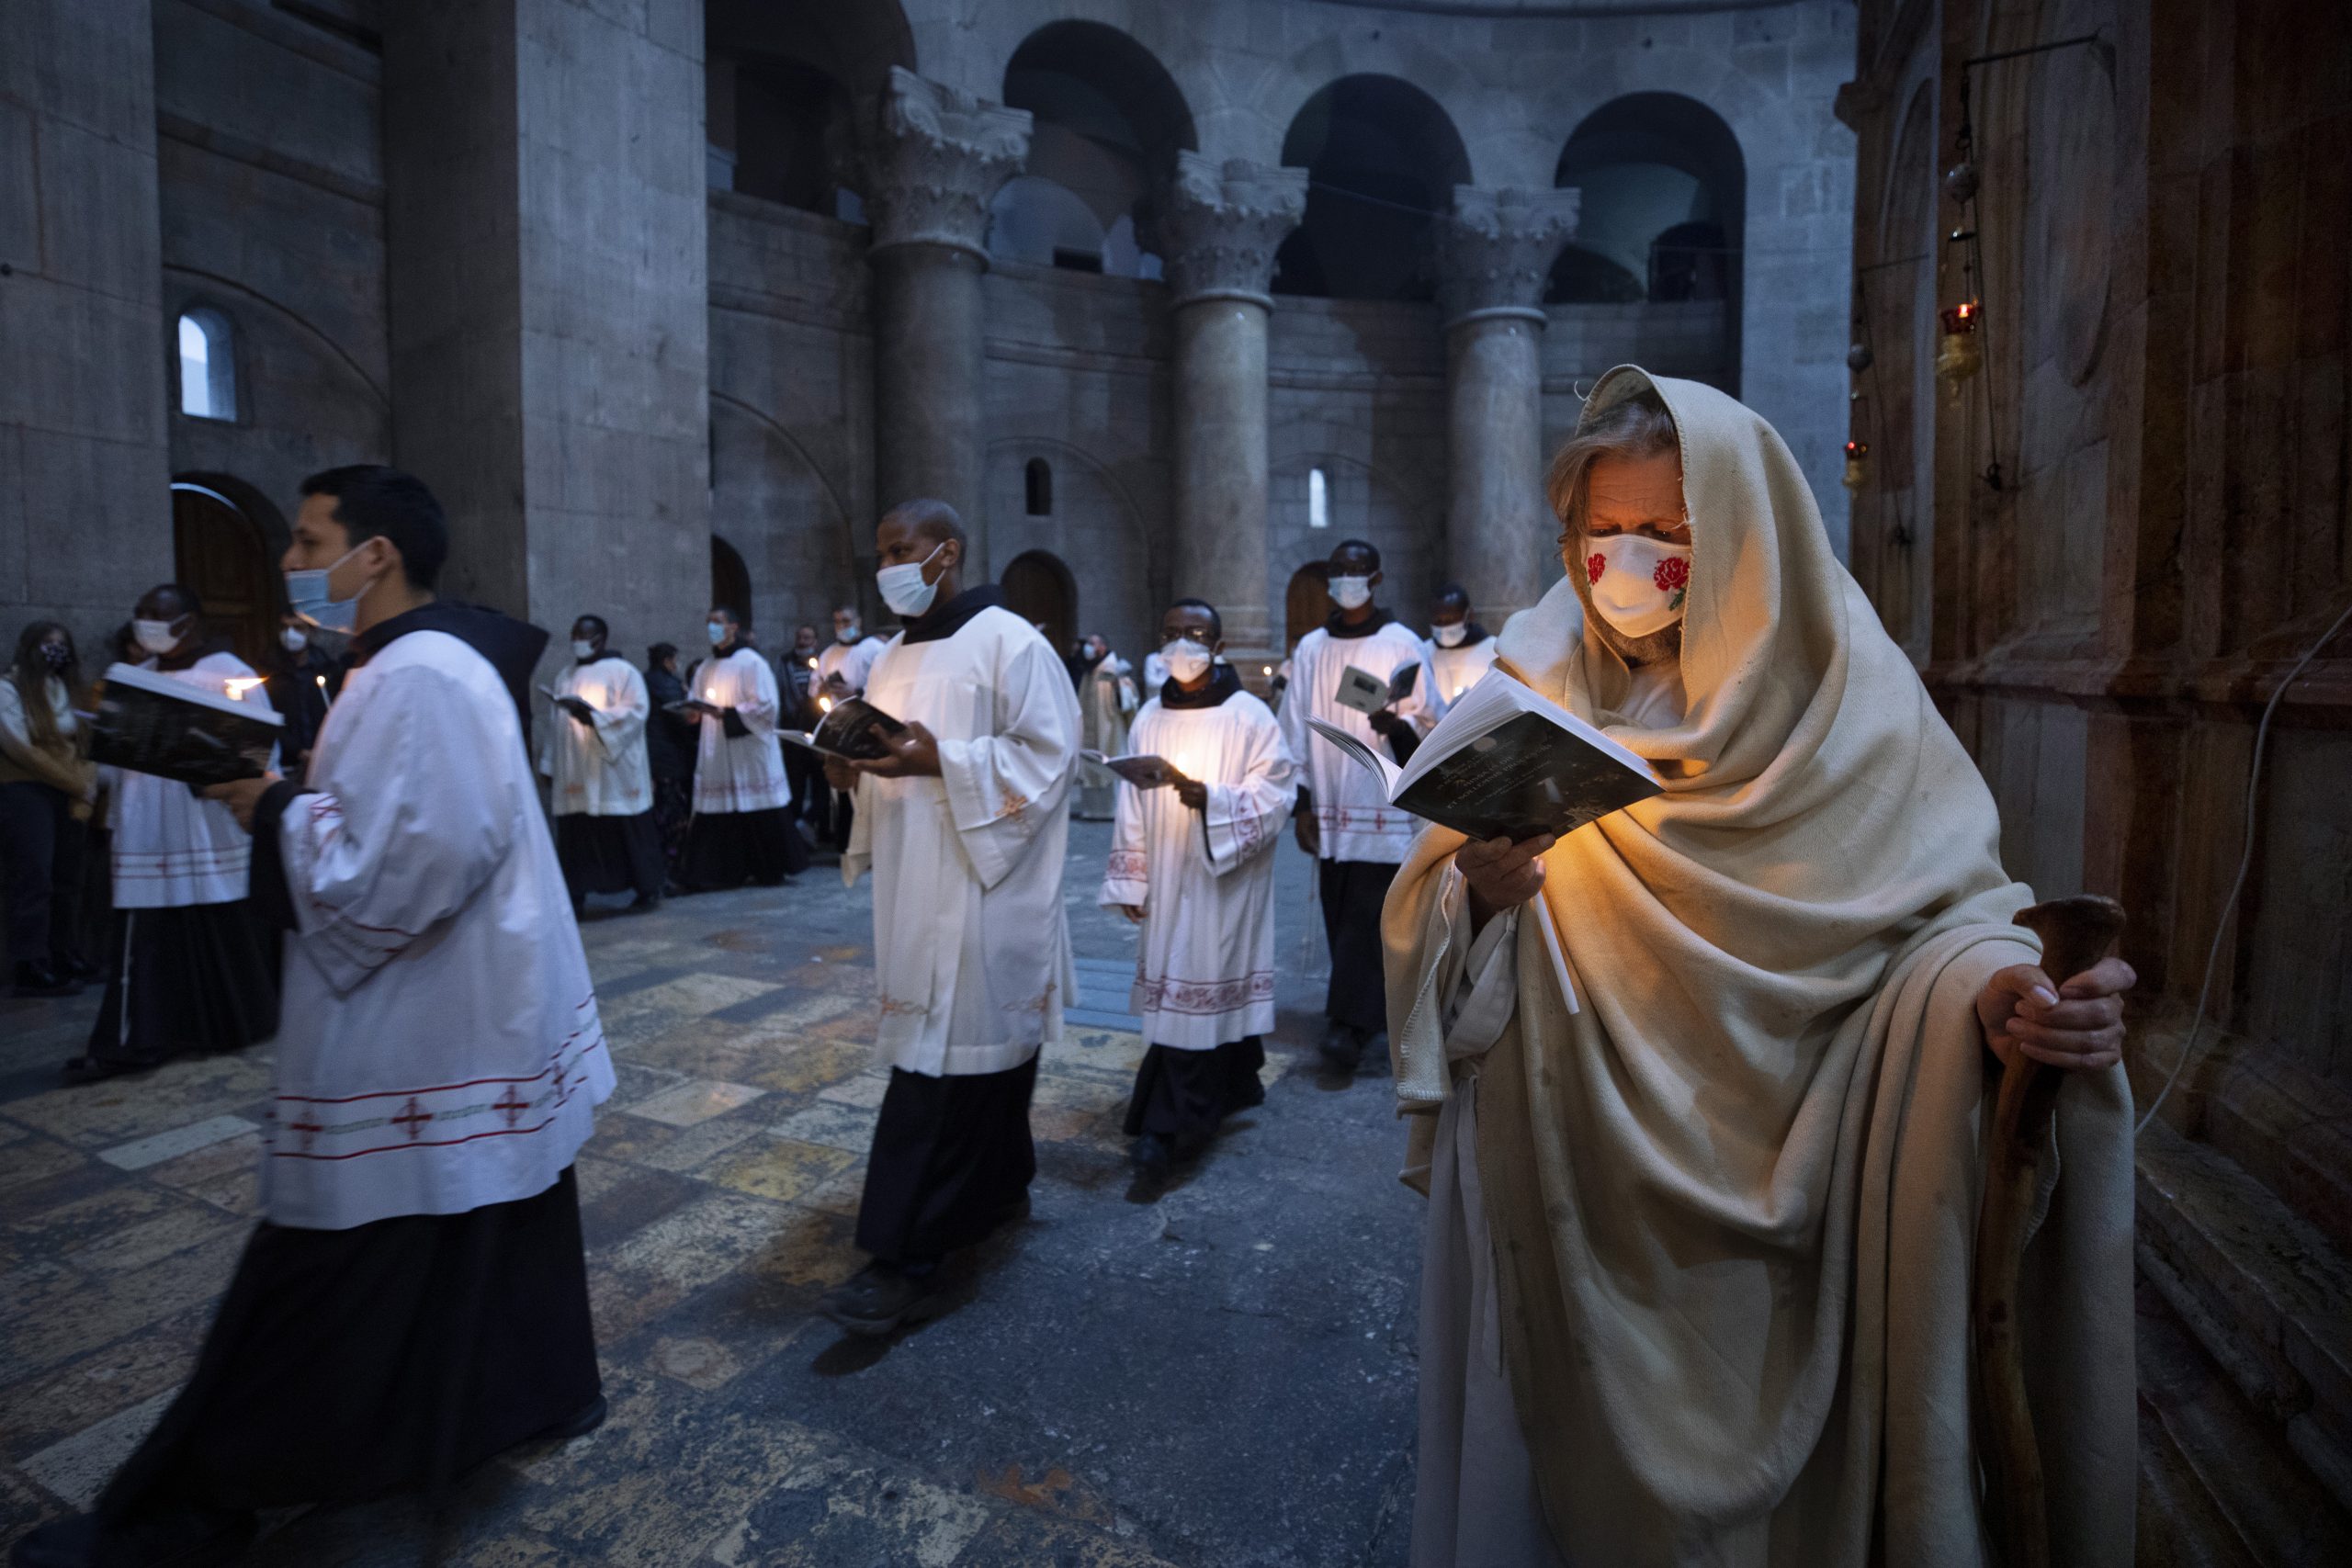 Priests circle the Edicule during Easter Sunday Mass led by the Latin Patriarch at the Church of the Holy Sepulchre, where many Christians believe Jesus was crucified, buried and rose from the dead, in the Old City of Jerusalem, Sunday, April 4, 2021. (AP Photo/Oded Balilty)